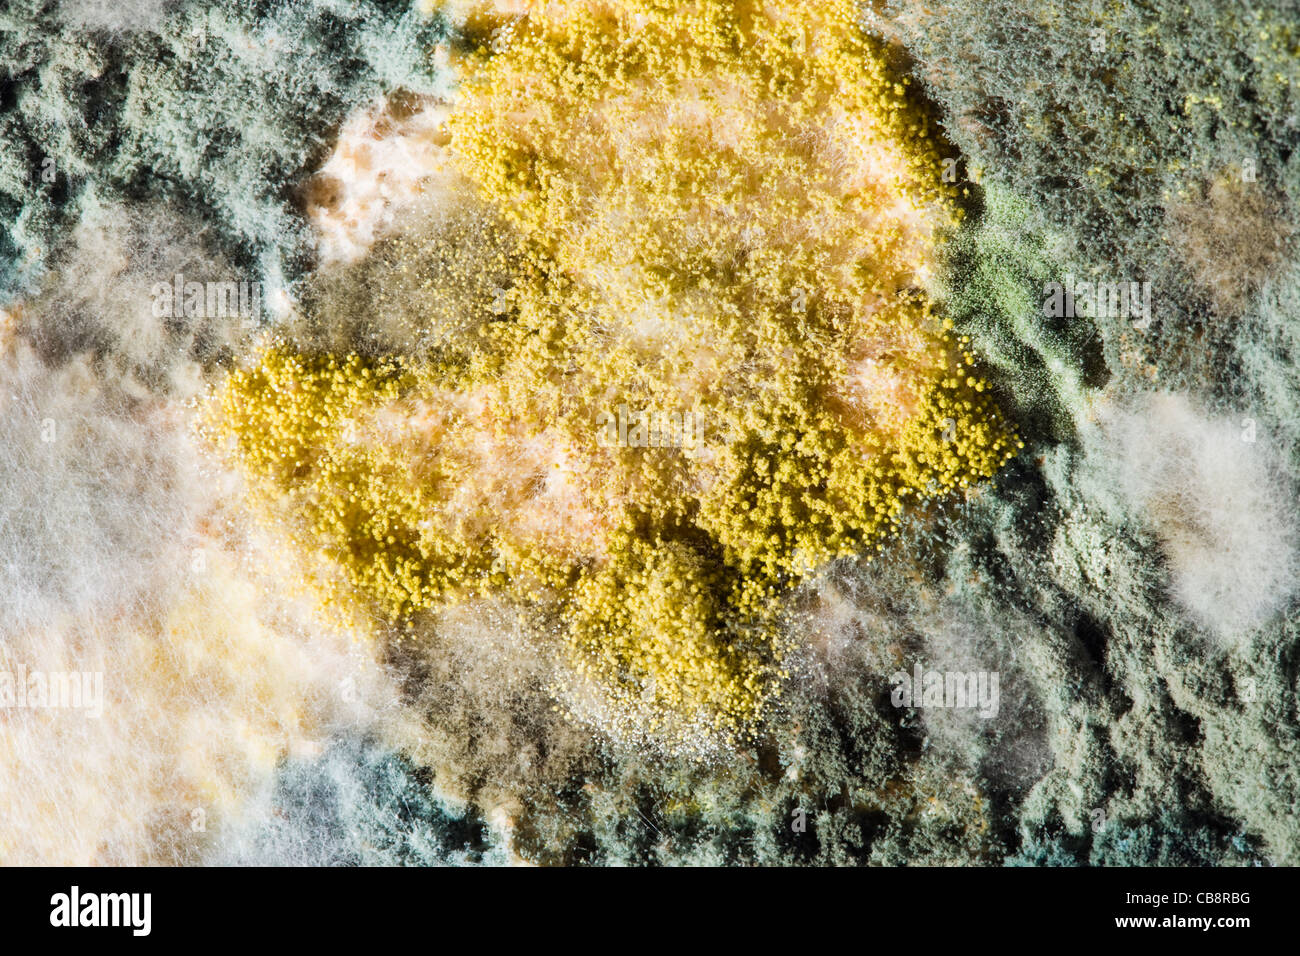 Mould on bread. Stock Photo